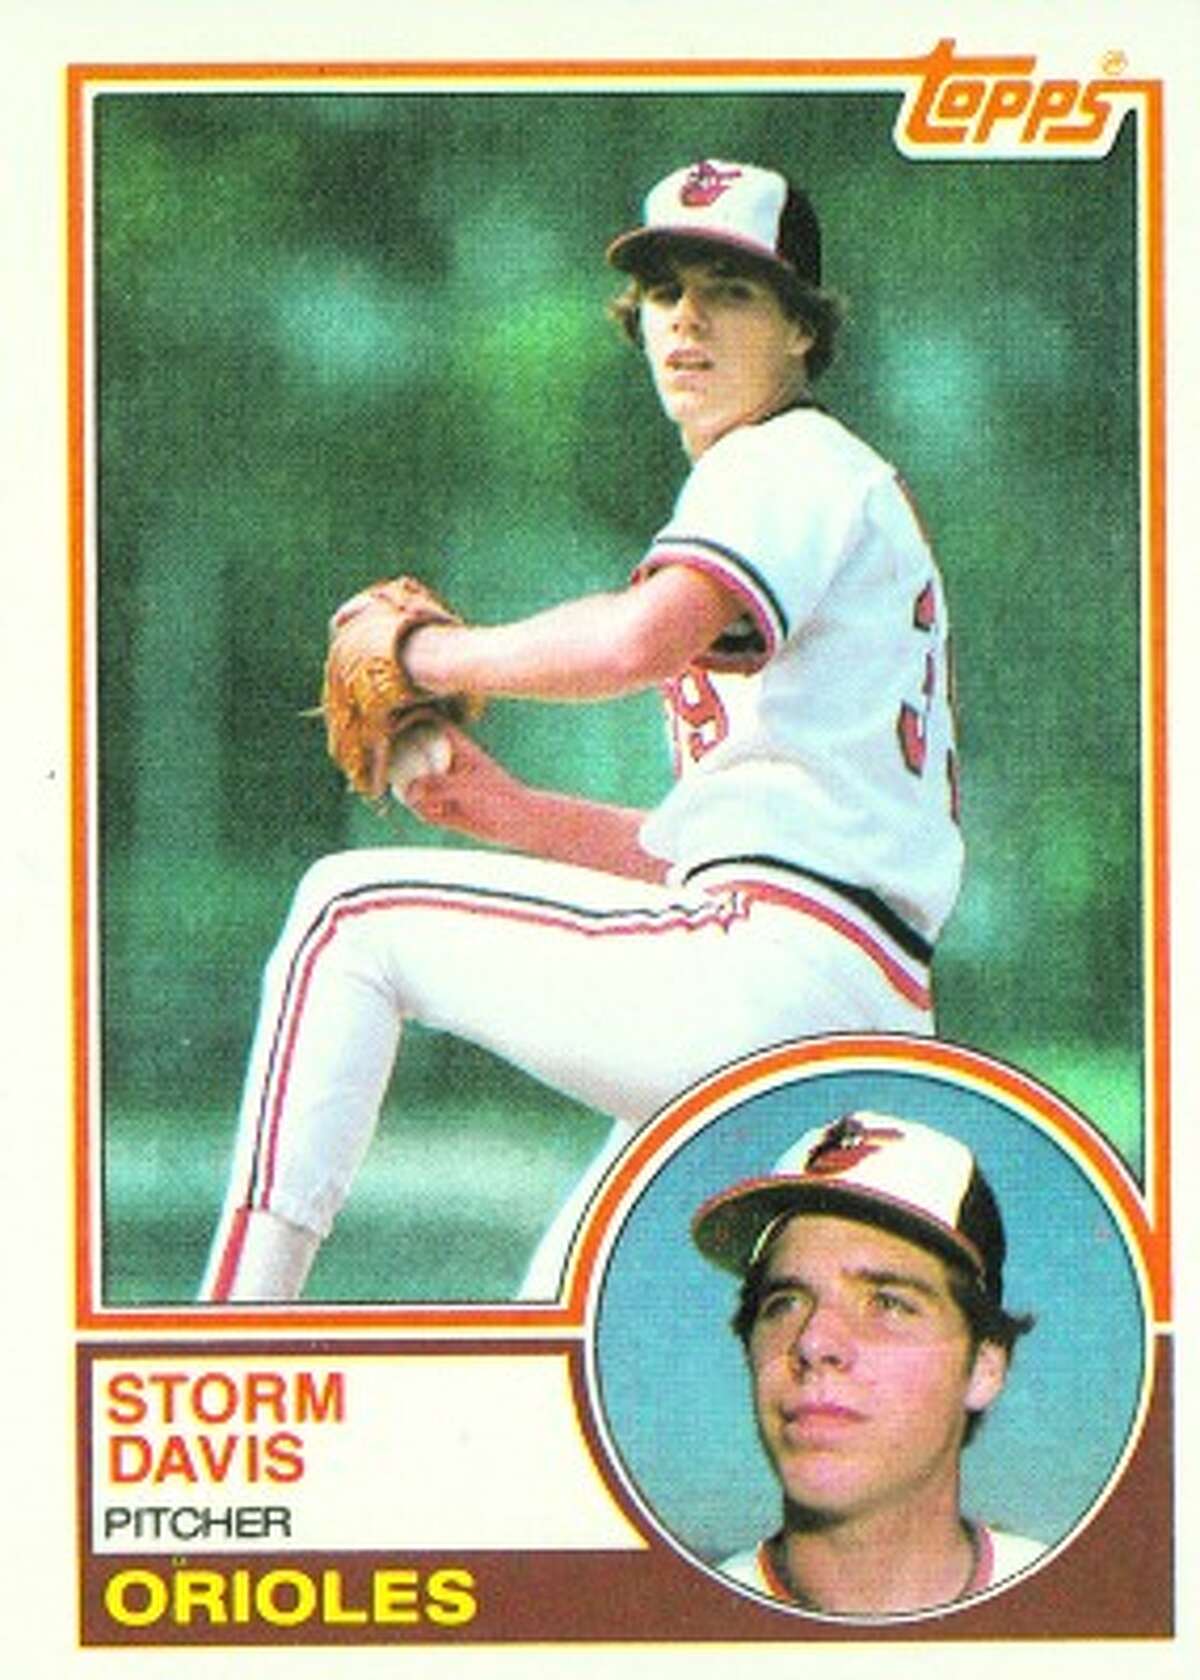 Storm Davis enjoyed a 12-year career in the major leagues, most of them with the Baltimore Orioles and Oakland A's. The right-handed pitcer won 113 games and was part of two World Championship teams.